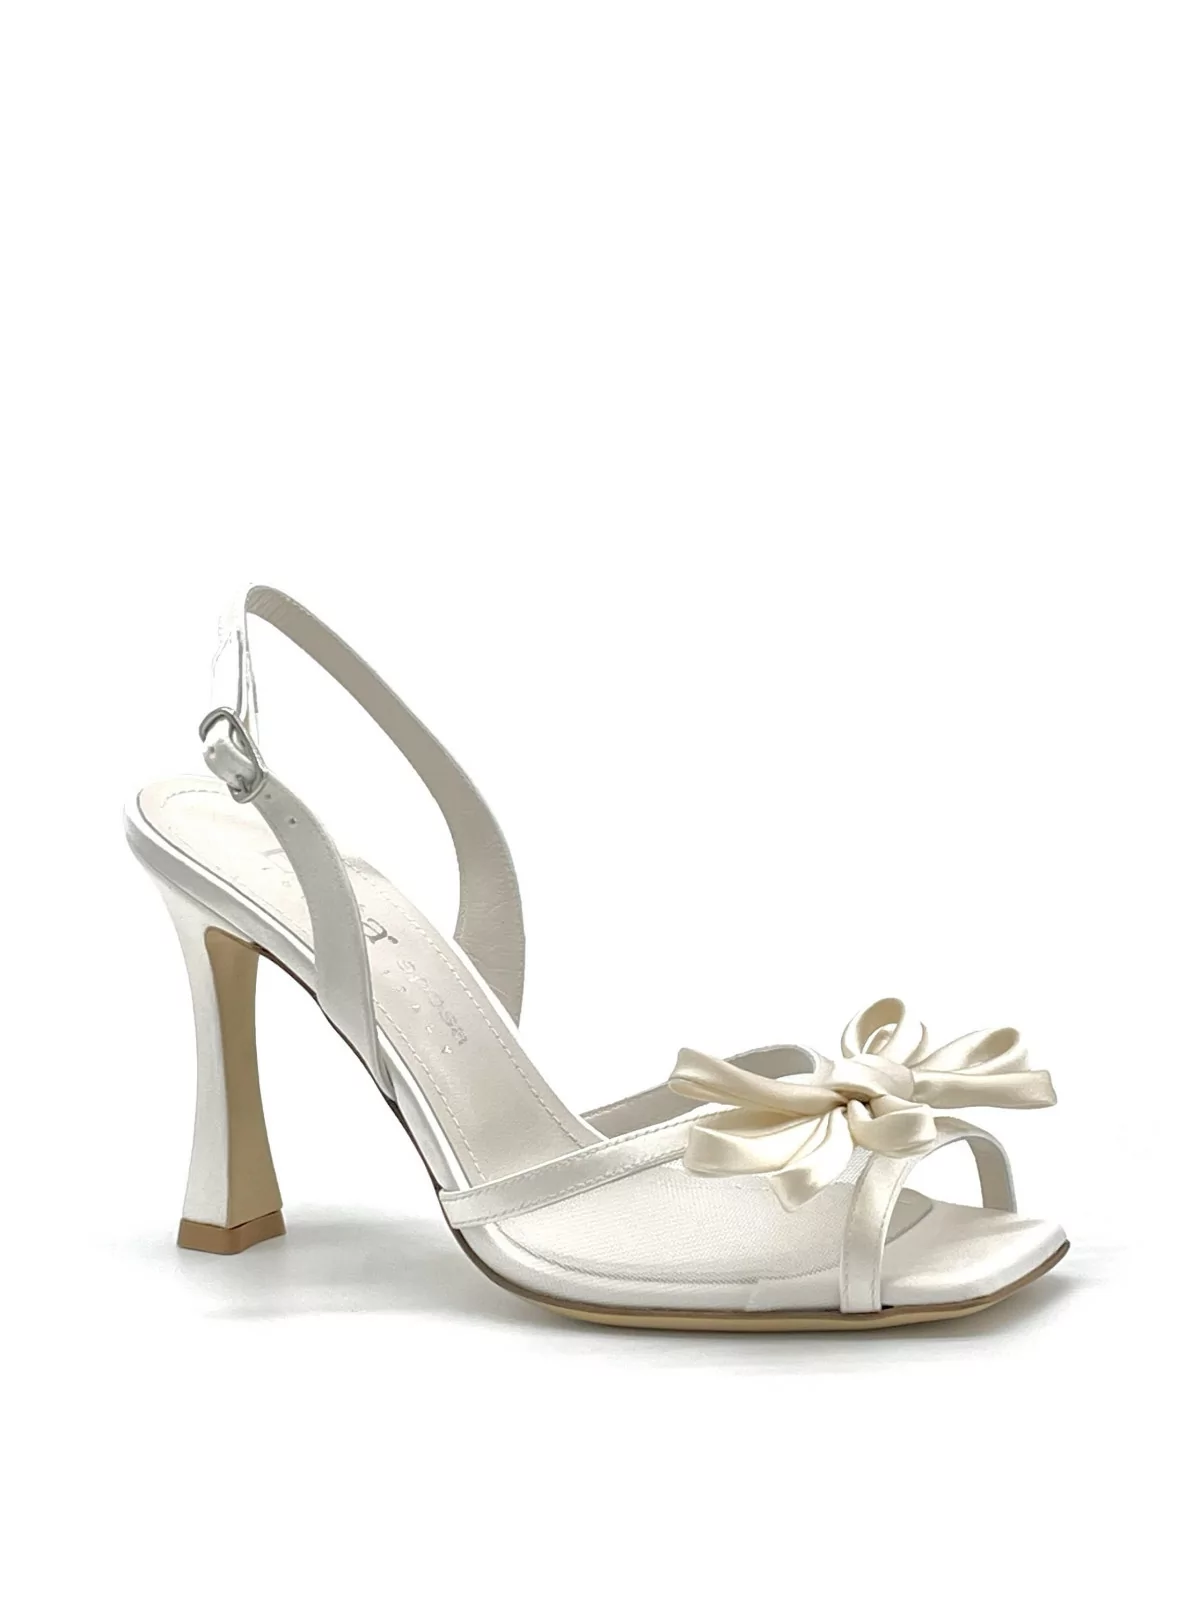 White silk sandal with mesh insert and white bow. Leather lining, leather sole. 